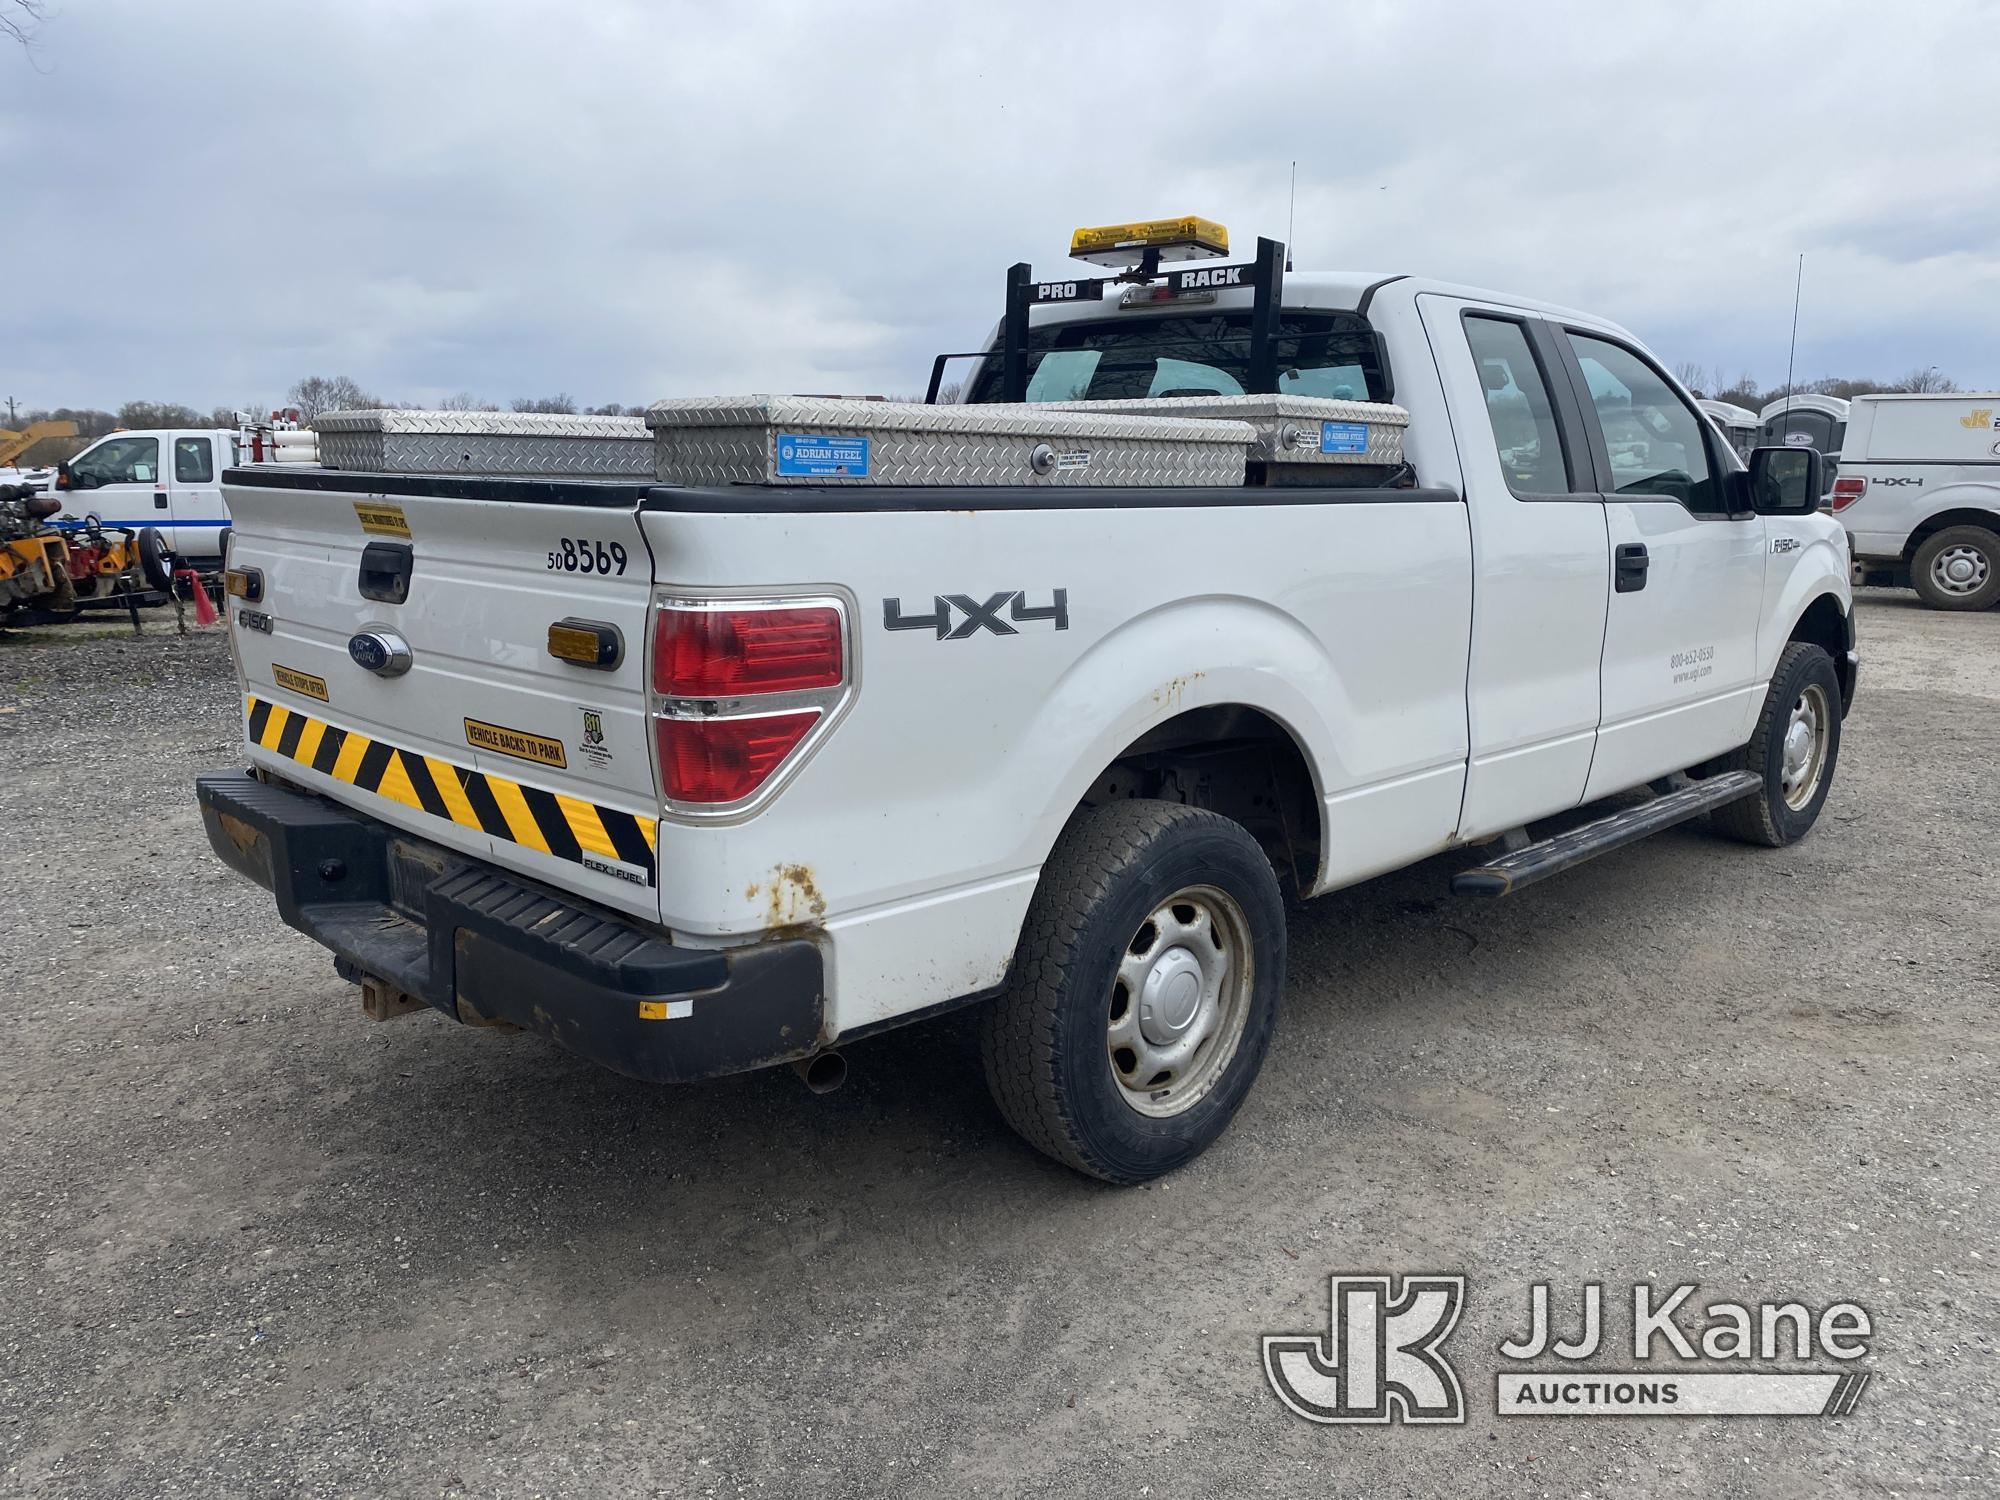 (Plymouth Meeting, PA) 2013 Ford F150 4x4 Extended-Cab Pickup Truck Runs & Moves, Check Engine Light